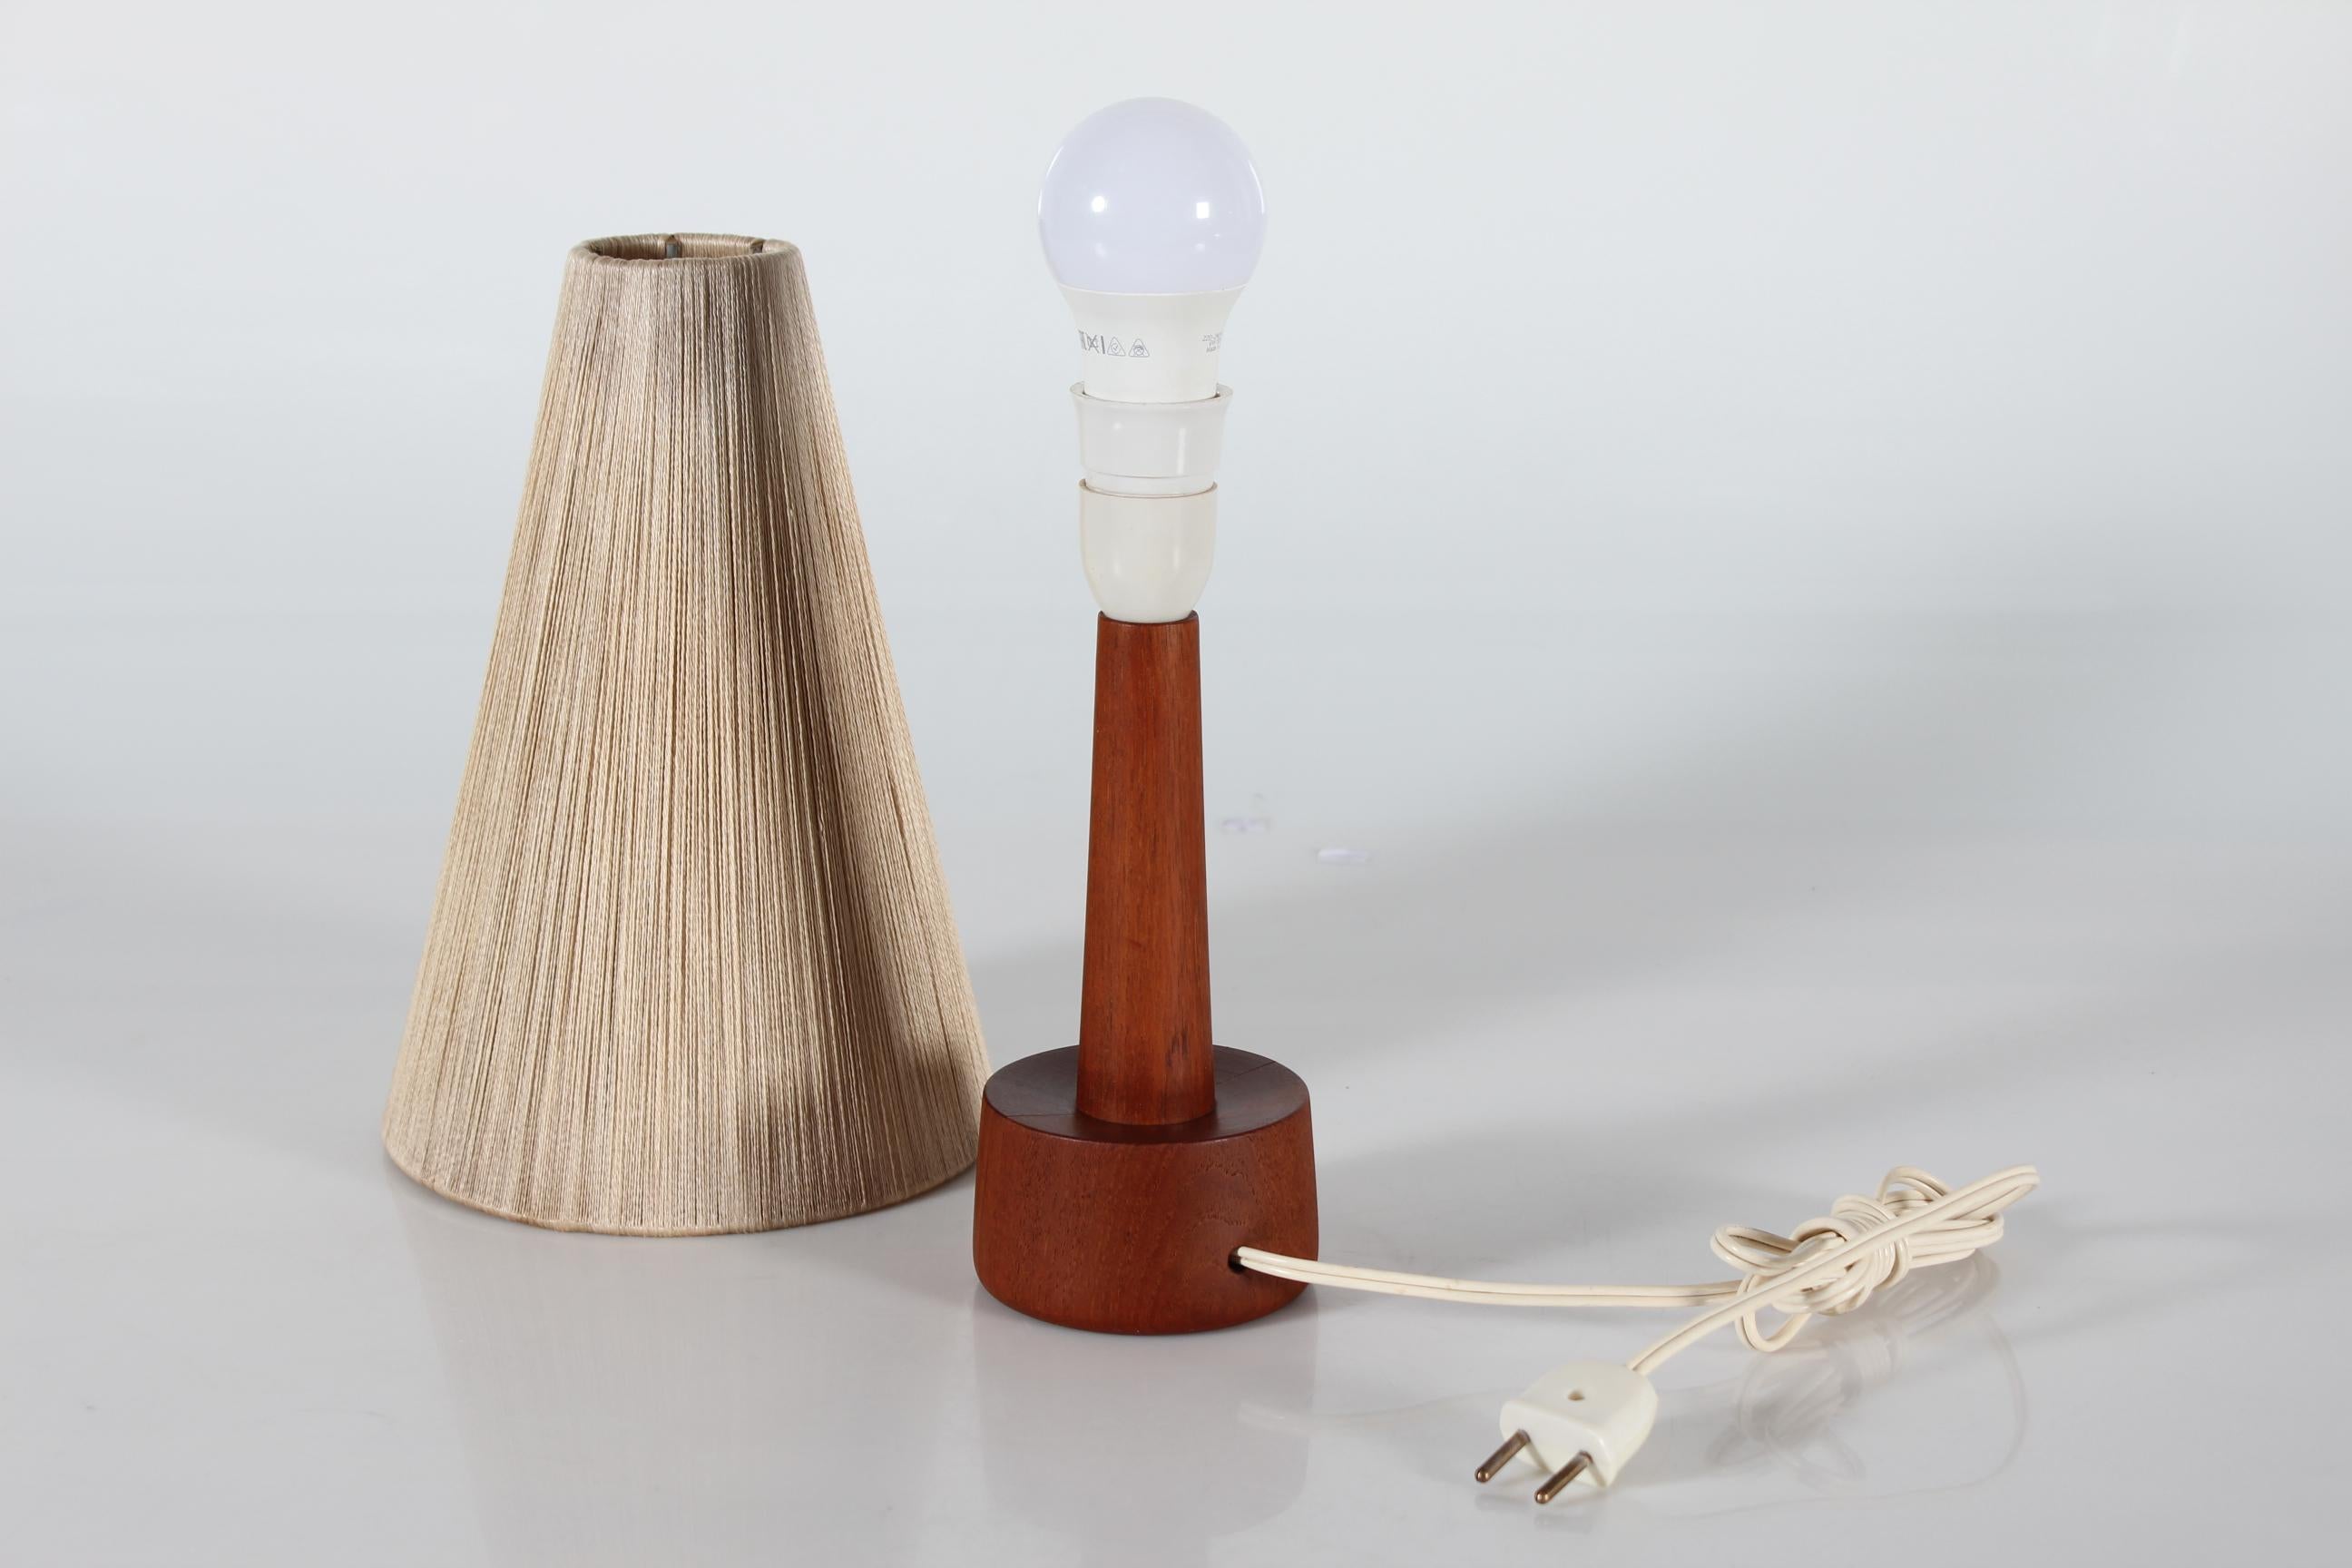 Danish Modernist Table Lamp of Teak with Cone-Shaped Yarn Shade 1970s For Sale 1